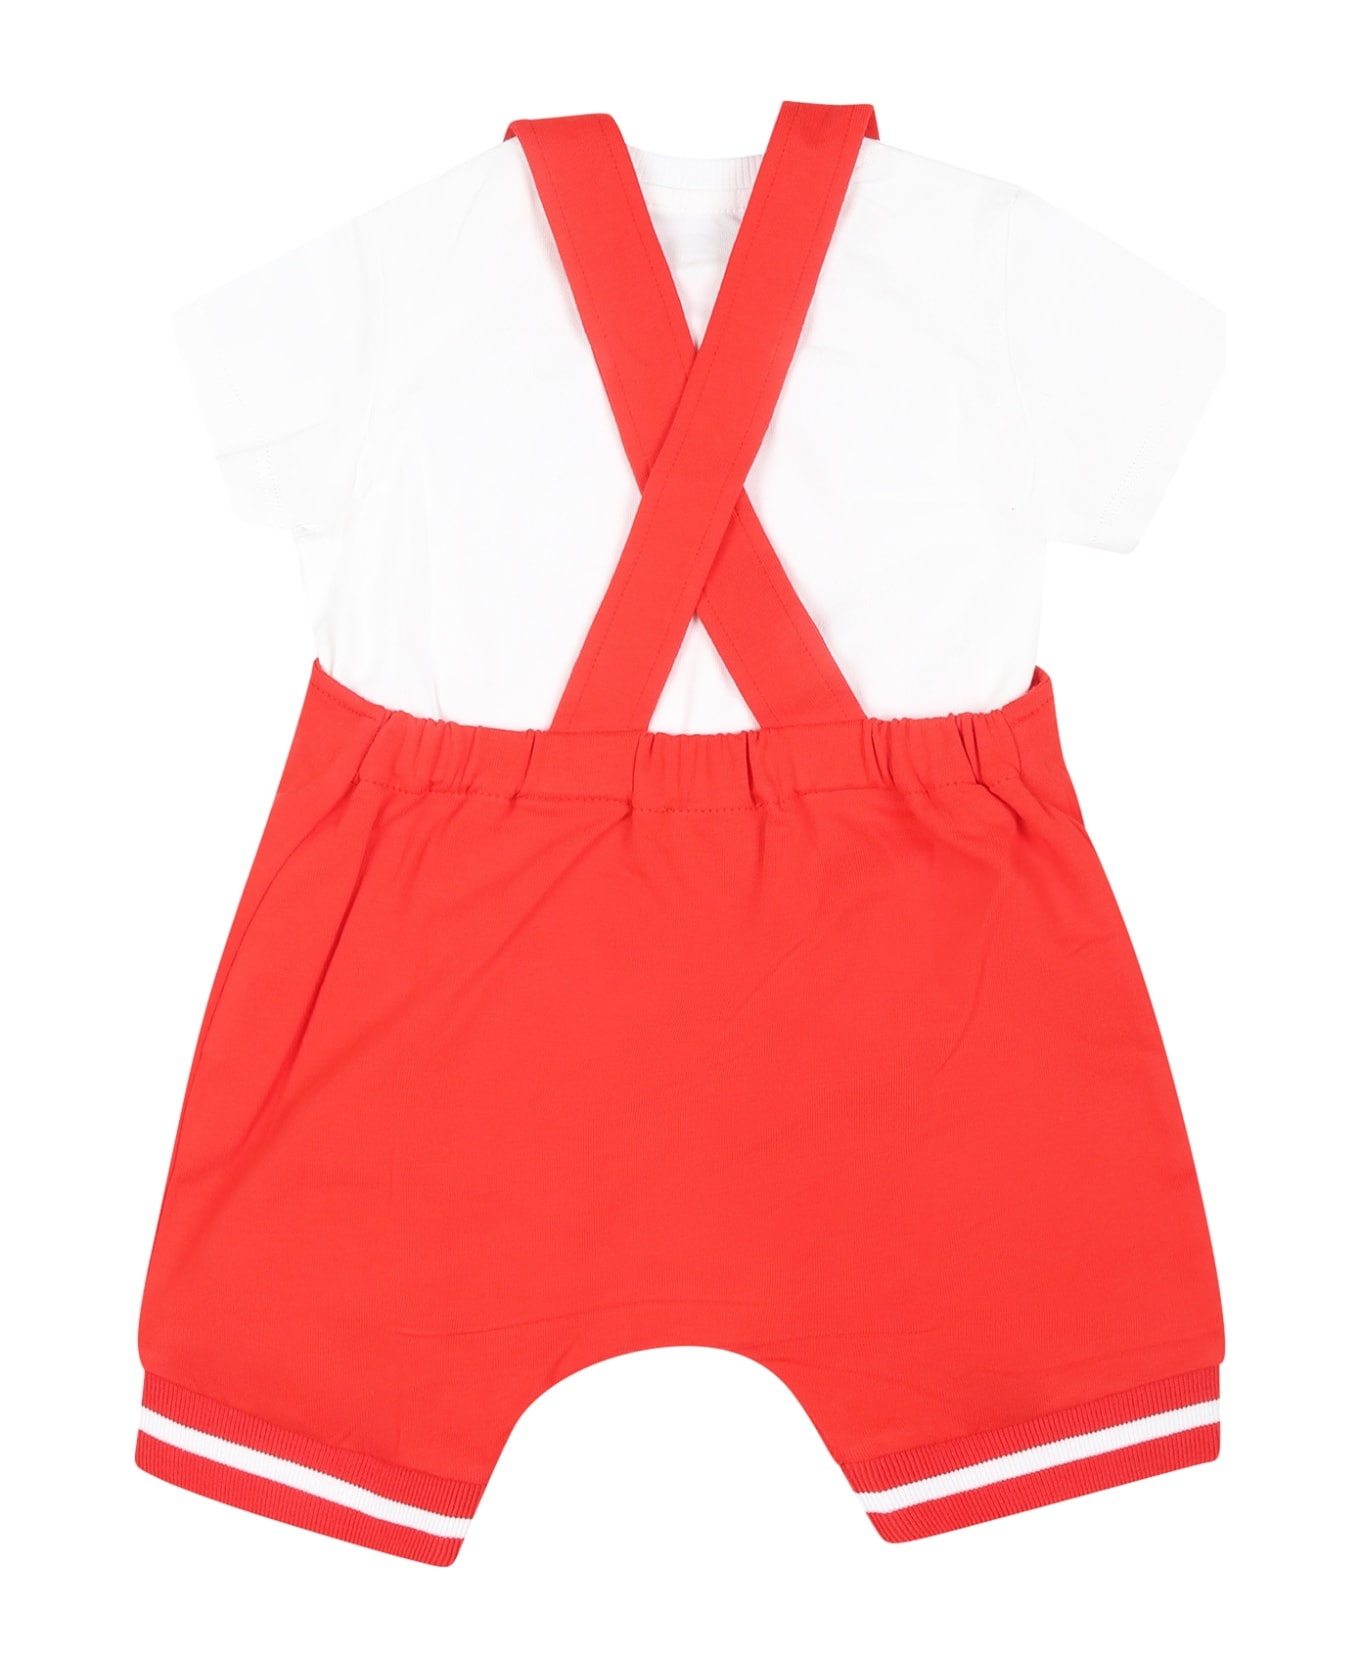 Moschino Red Suit For Baby Boy With Teddy Bears - Red